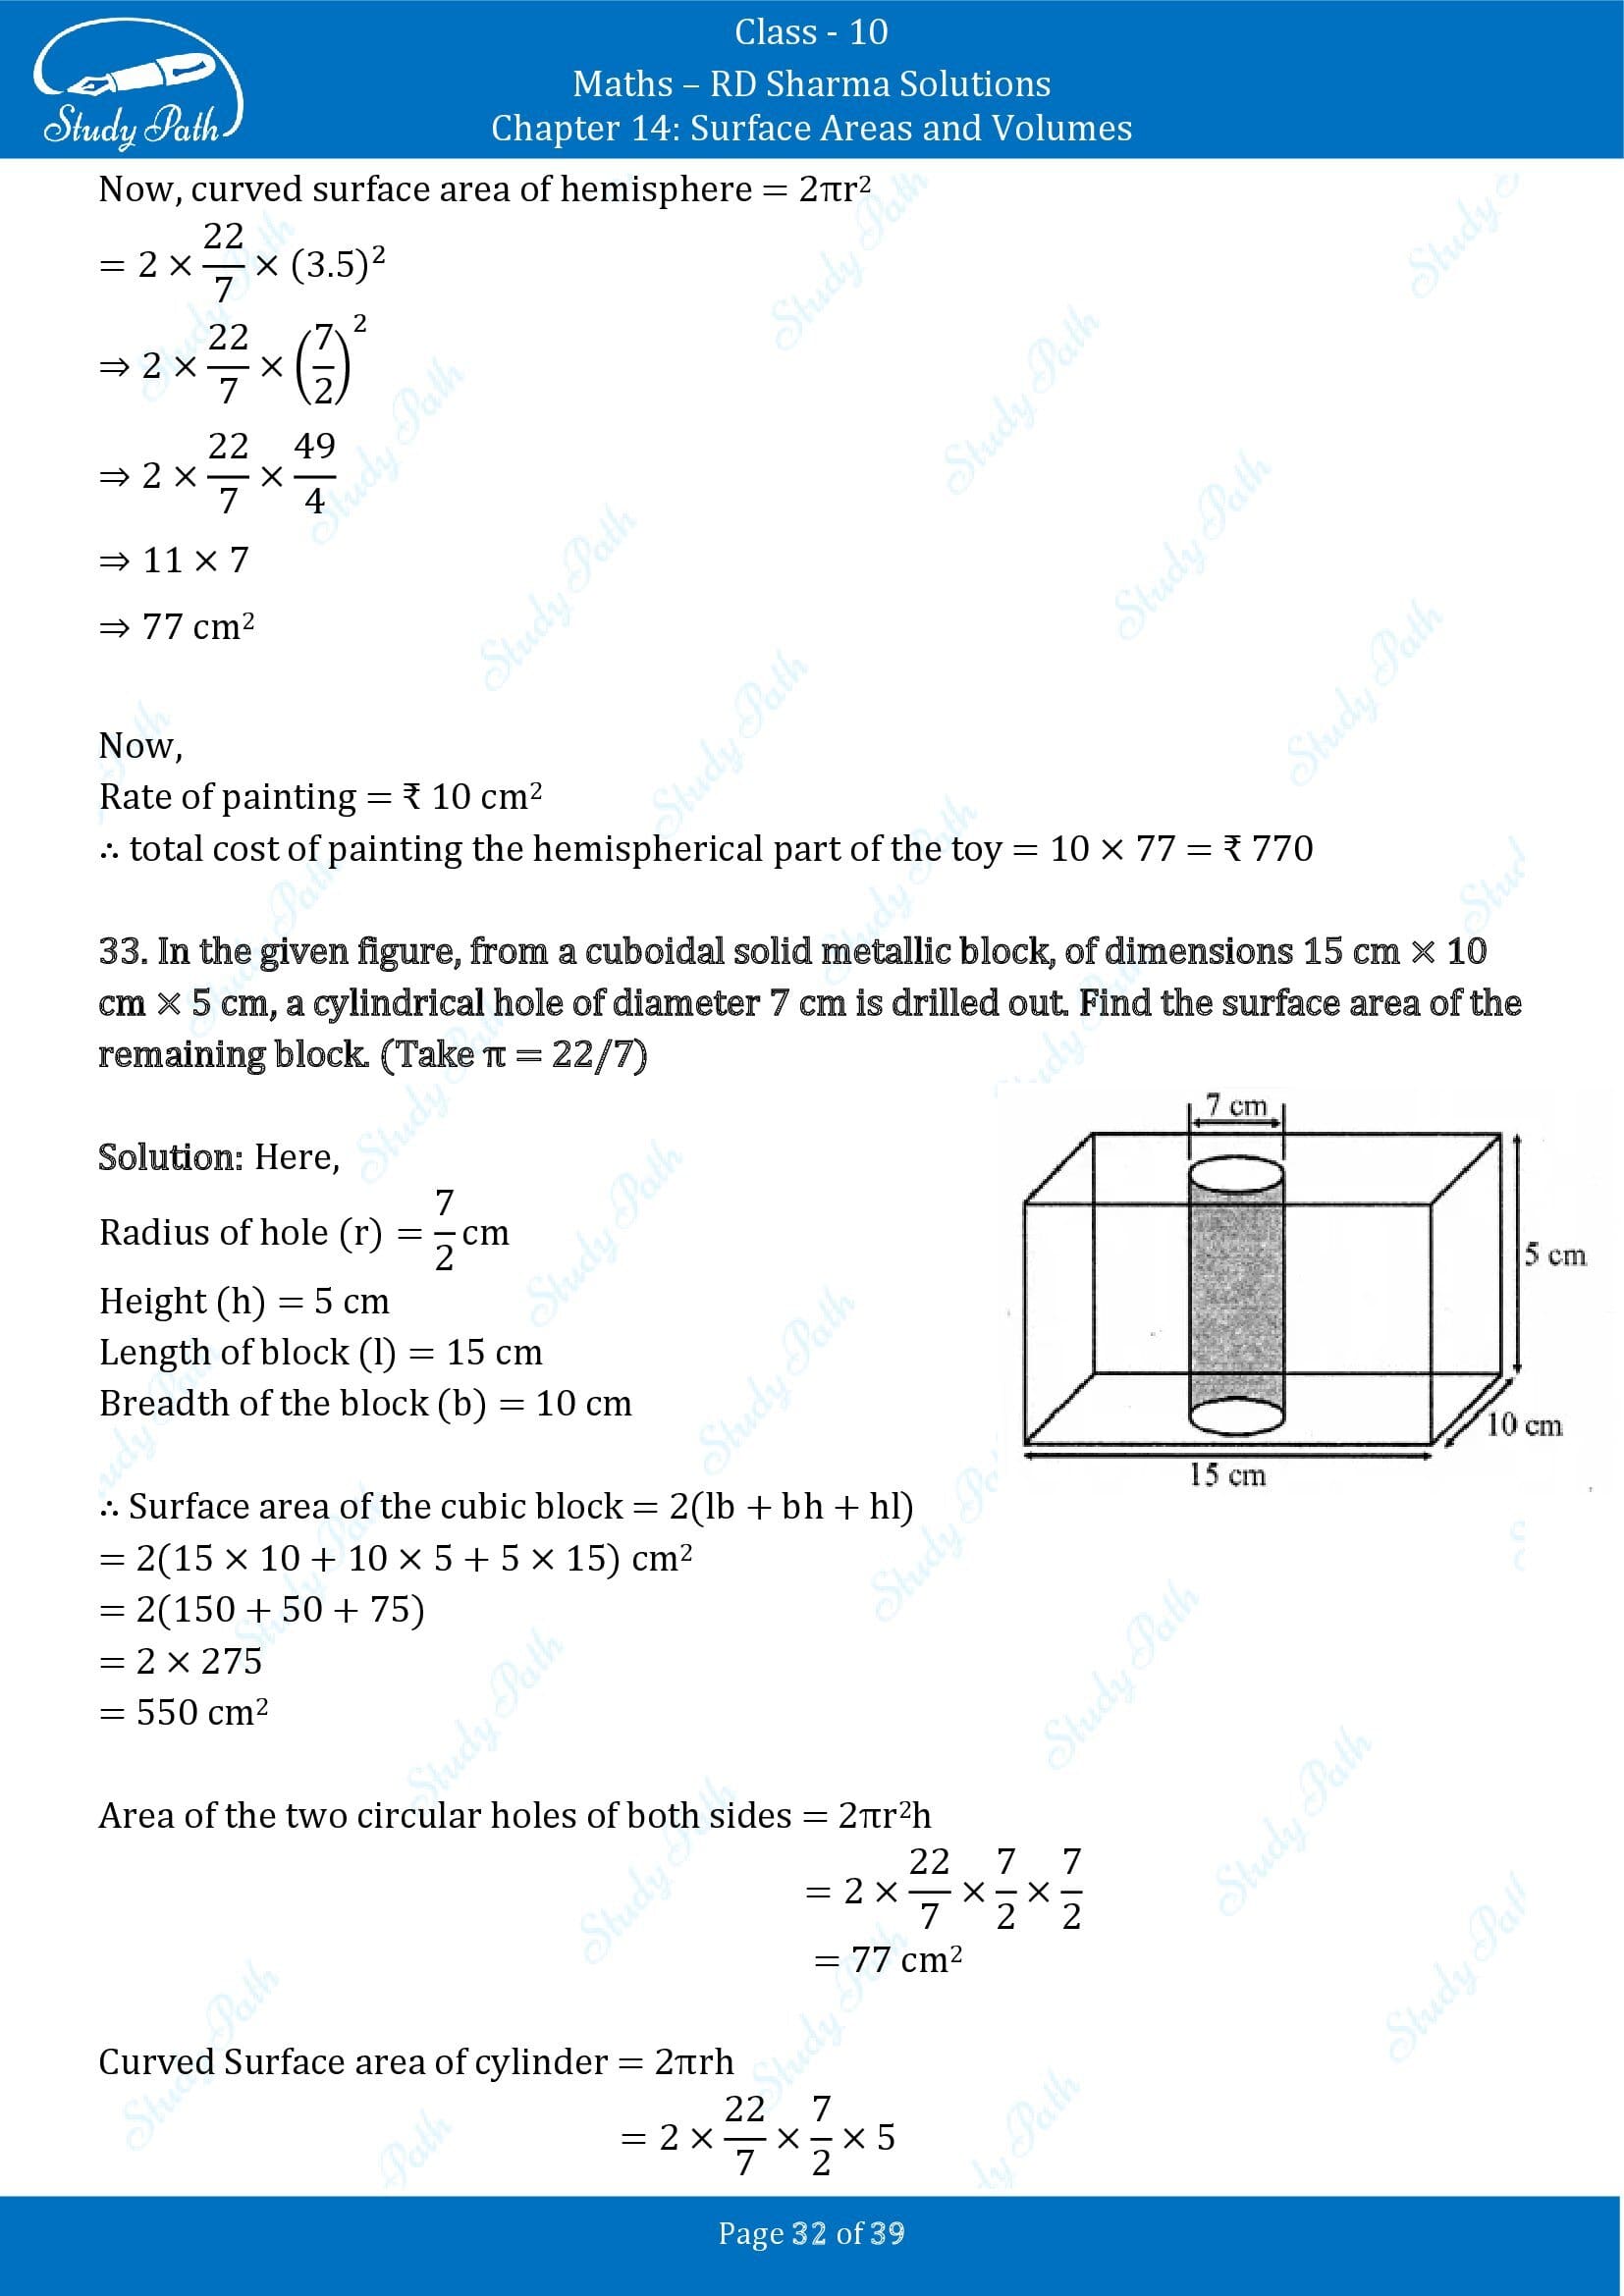 RD Sharma Solutions Class 10 Chapter 14 Surface Areas and Volumes Exercise 14.2 00032